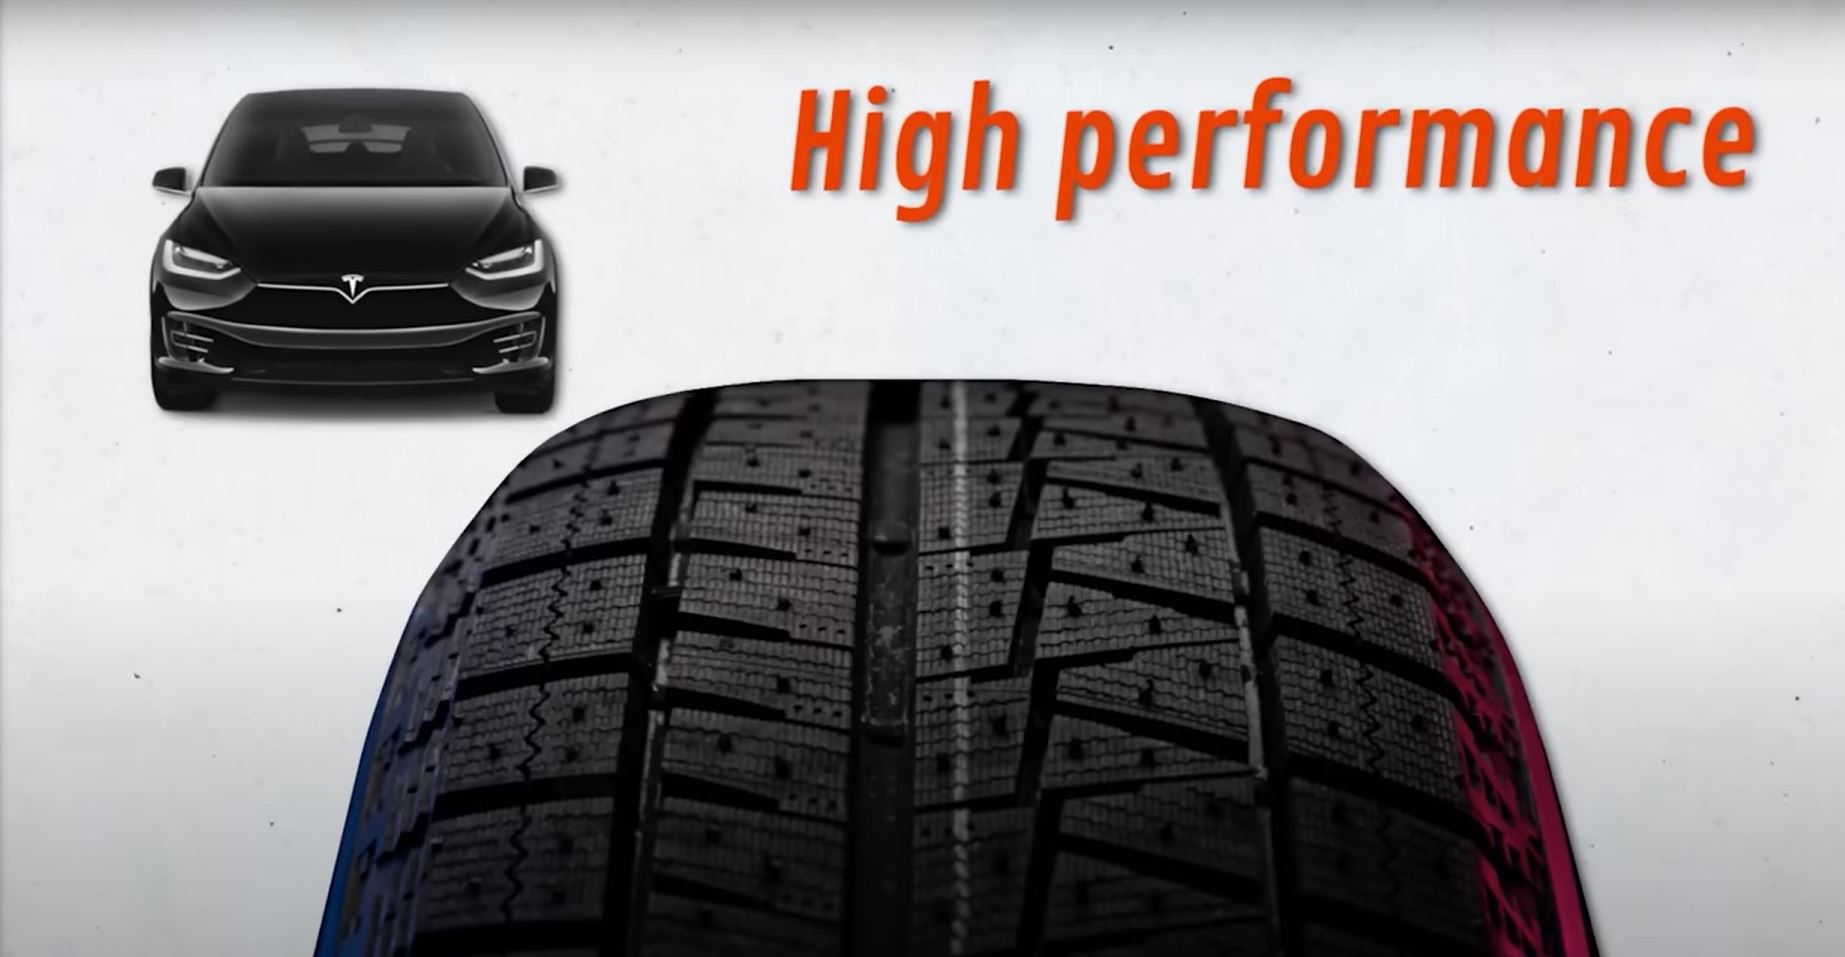 Expert Auto Mechanic Explains Why Pricey EV Tires Wear Out Faster